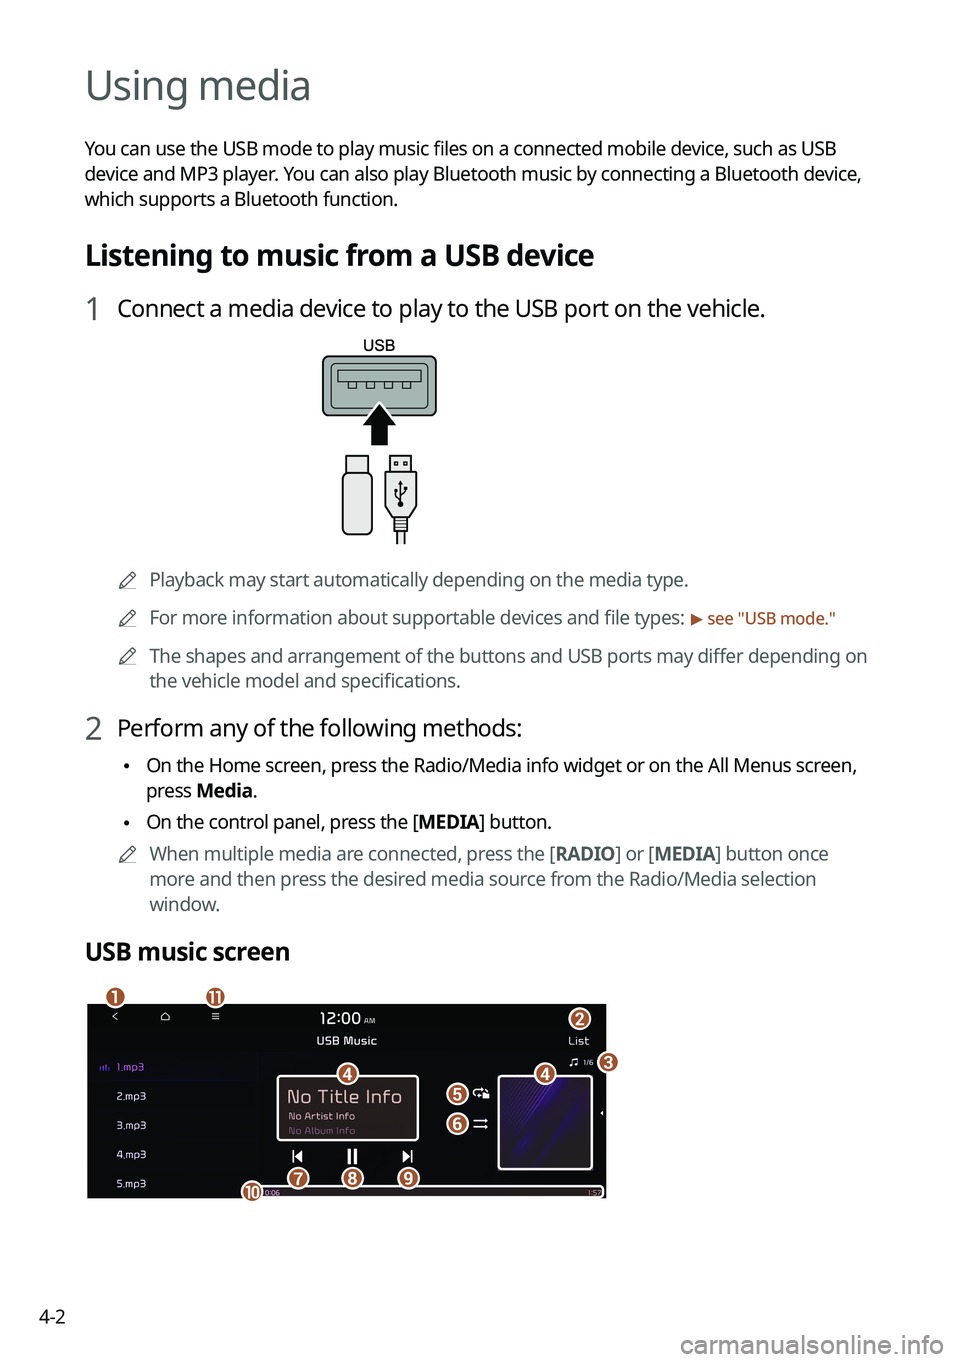 KIA K5 2022  Navigation System Quick Reference Guide 4-2
Using media
You can use the USB mode to play music files on a connected mobile device, such as USB 
device and MP3 player. You can also play Bluetooth music by connecting a Bluetooth device, 
whic